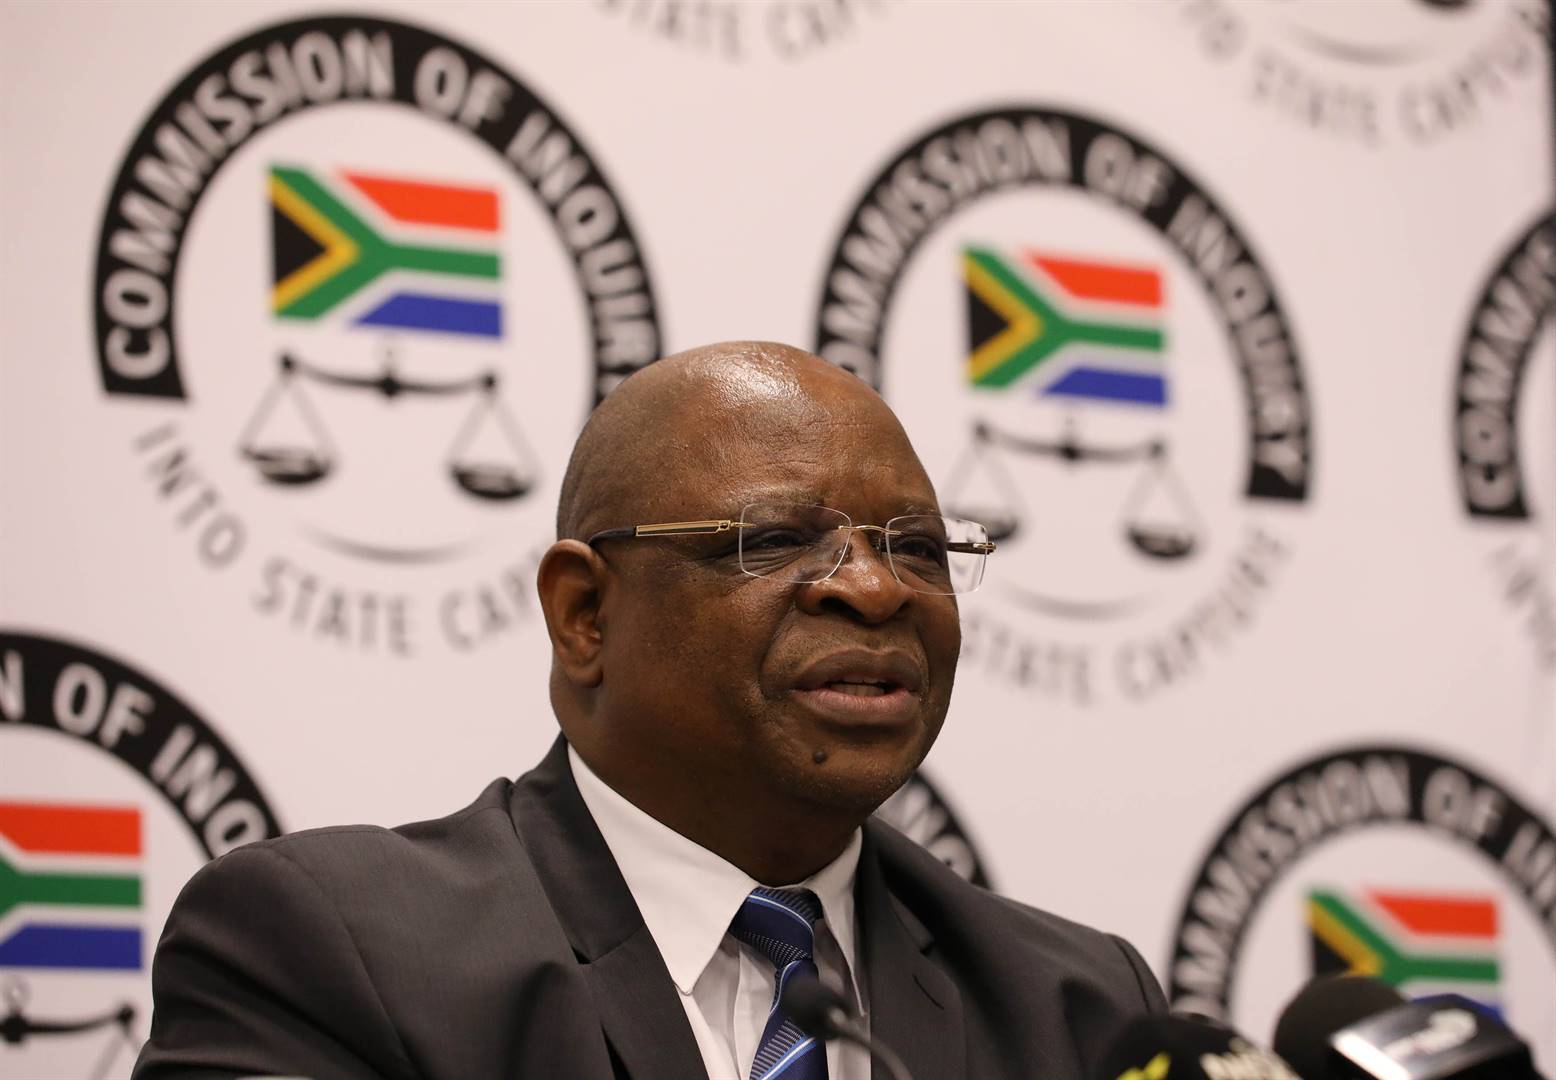 Allegations made before Deputy Chief Justice Raymond Zondo have made a dent on the country's reputation, argues the writer.